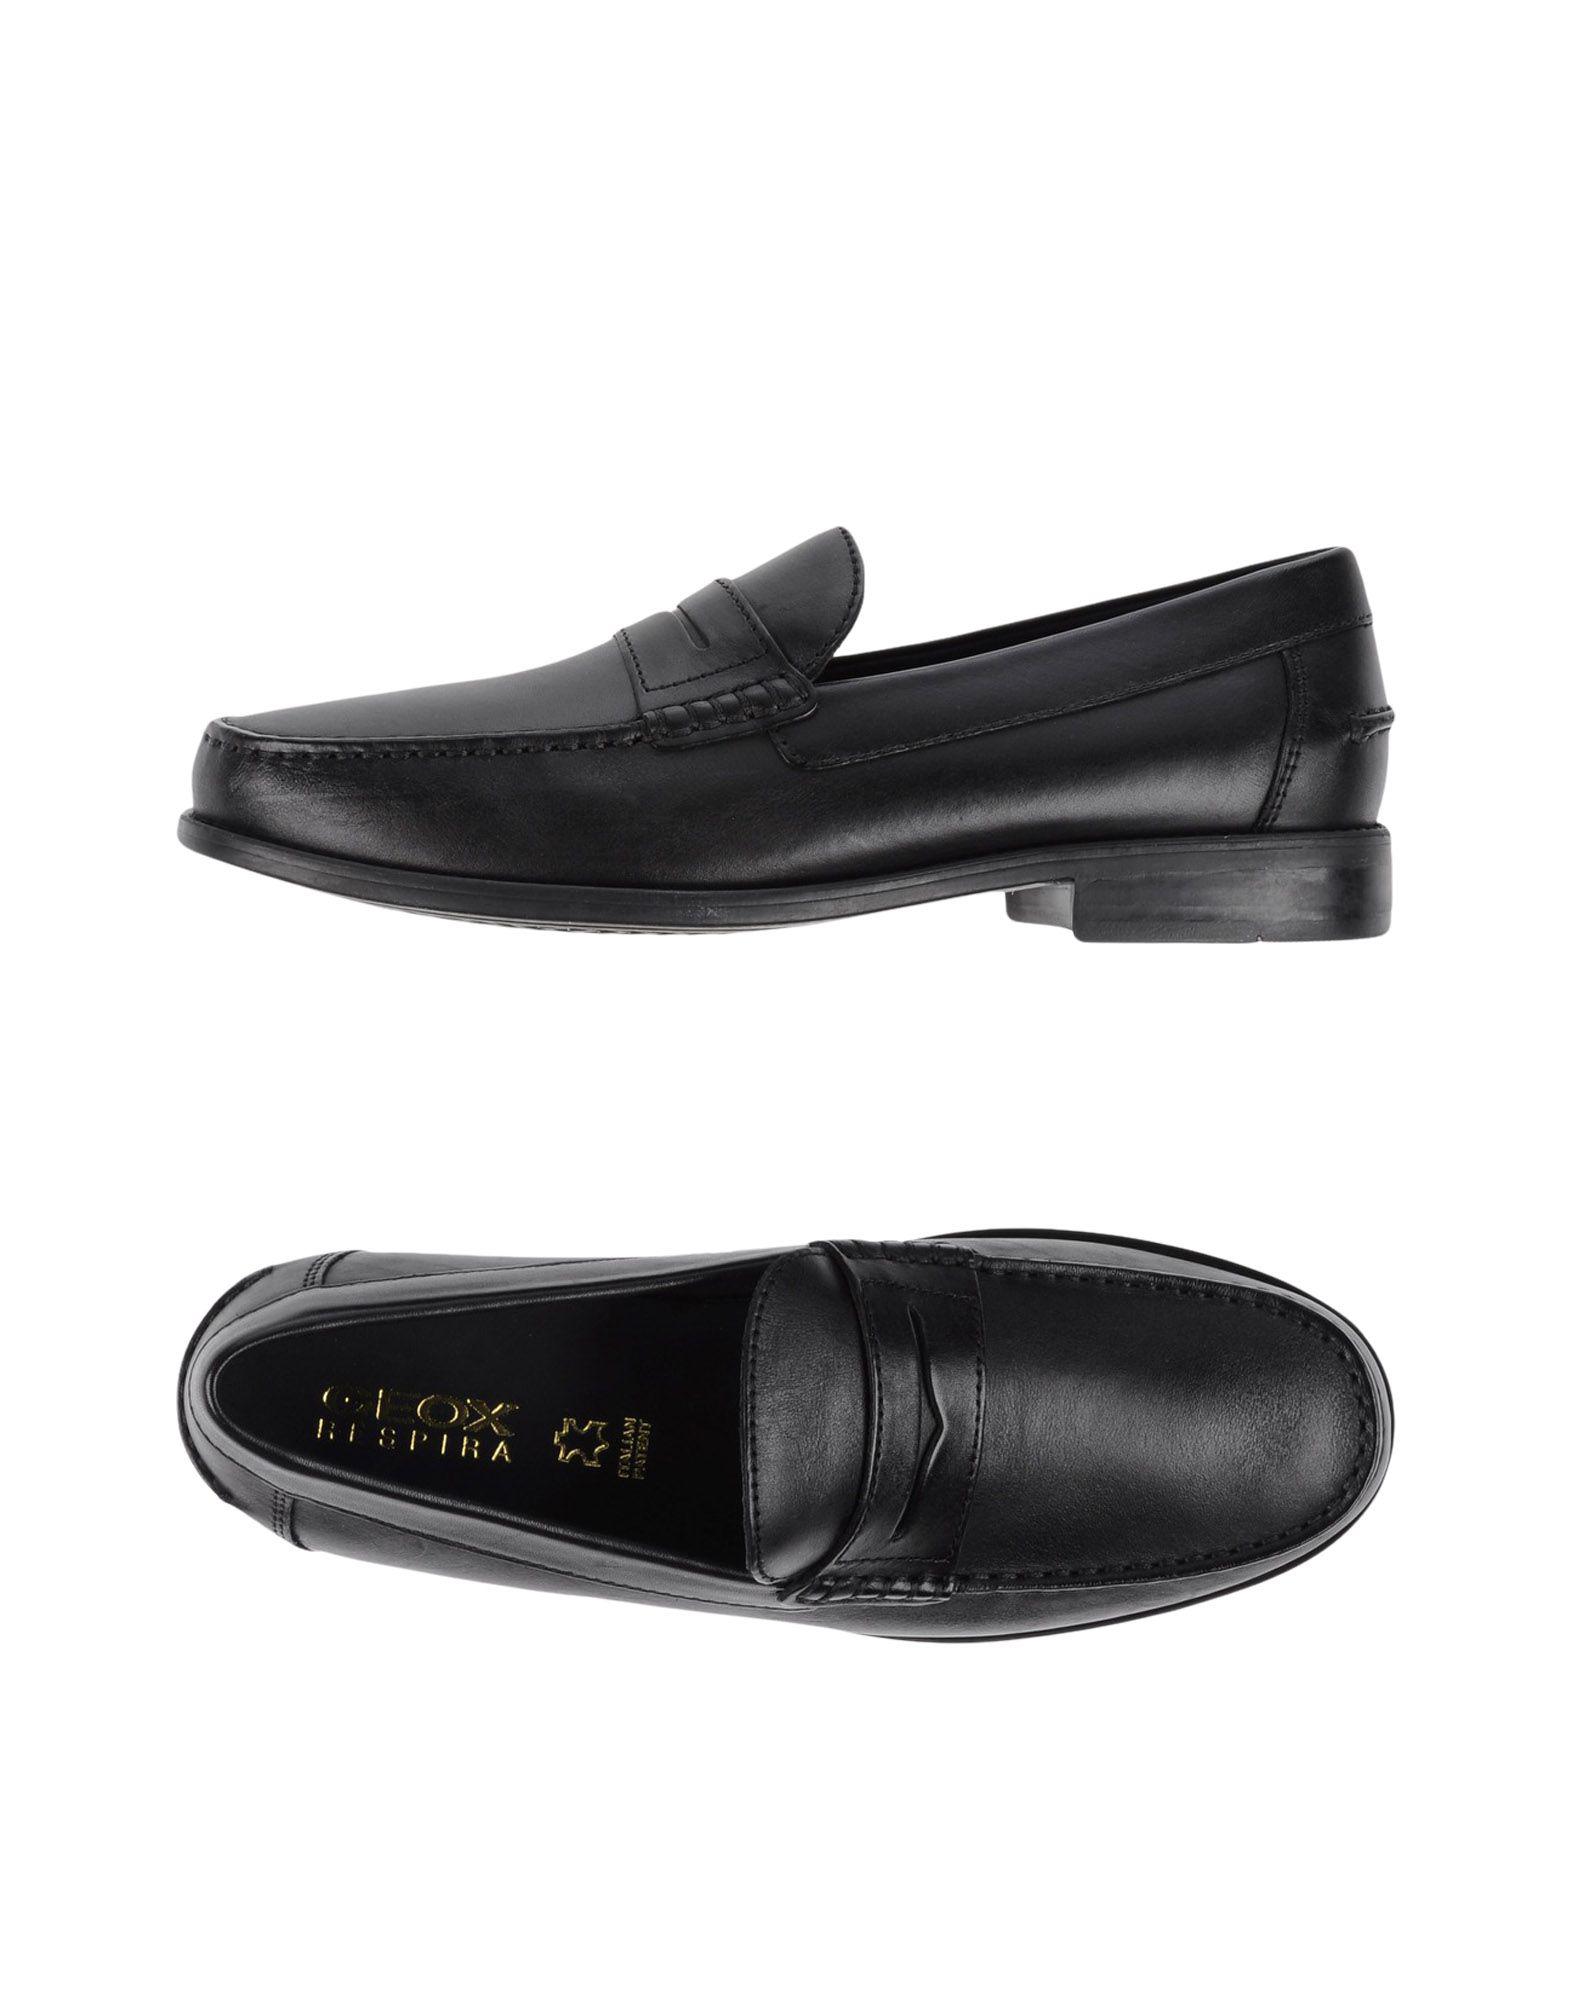 Geox Leather Loafer in Black for Men - Lyst